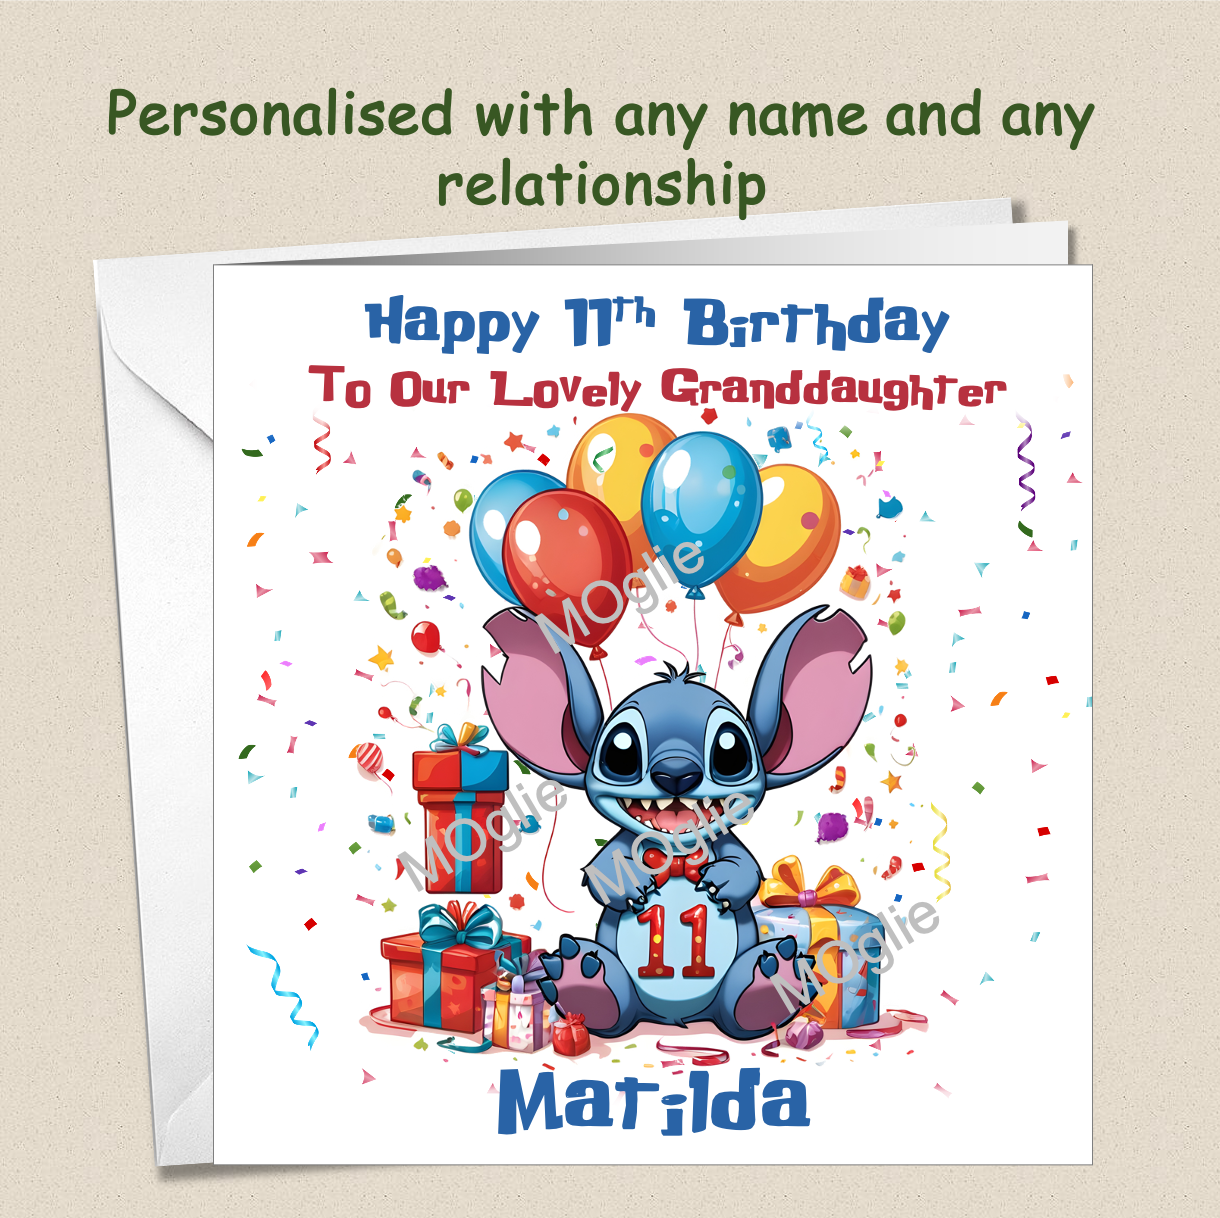 Personalised Lilo and Stitch 11th Birthday Cards with name and relationship